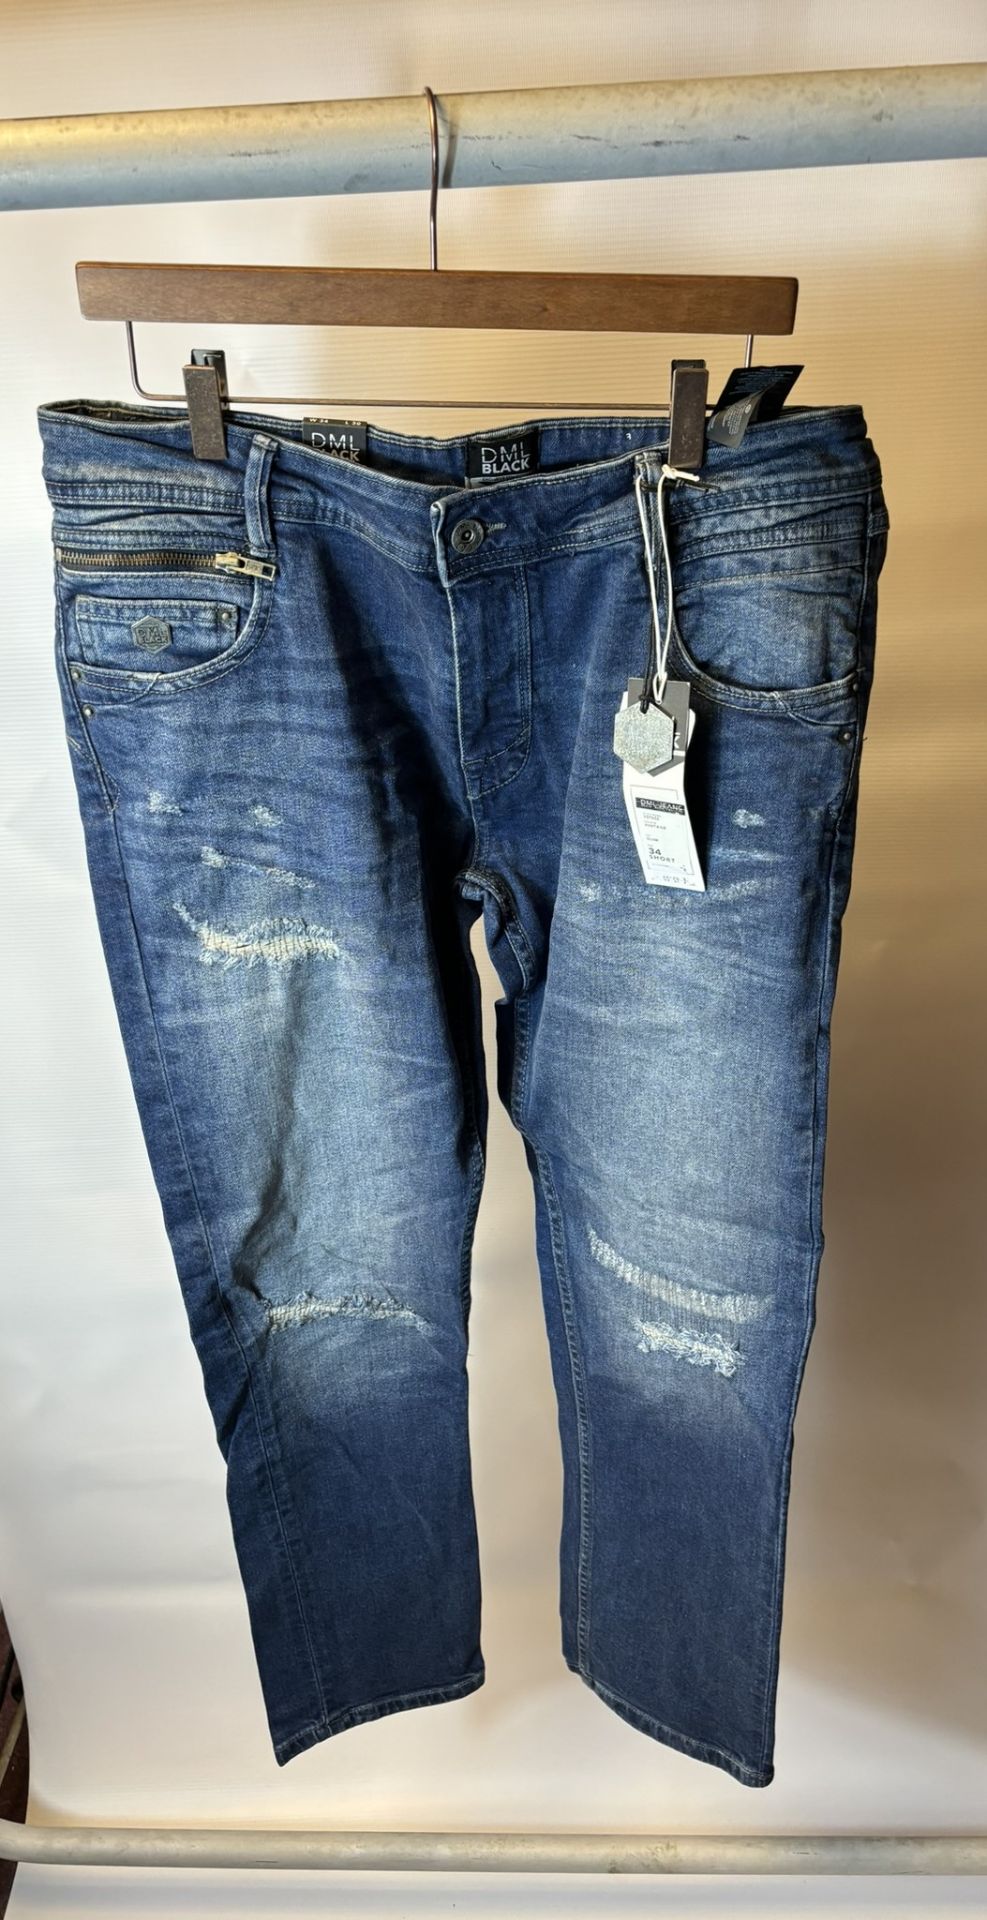 13 x Pairs Of various Sized DML Jeans Prophecy & Voyage Blue Jeans - Image 34 of 39